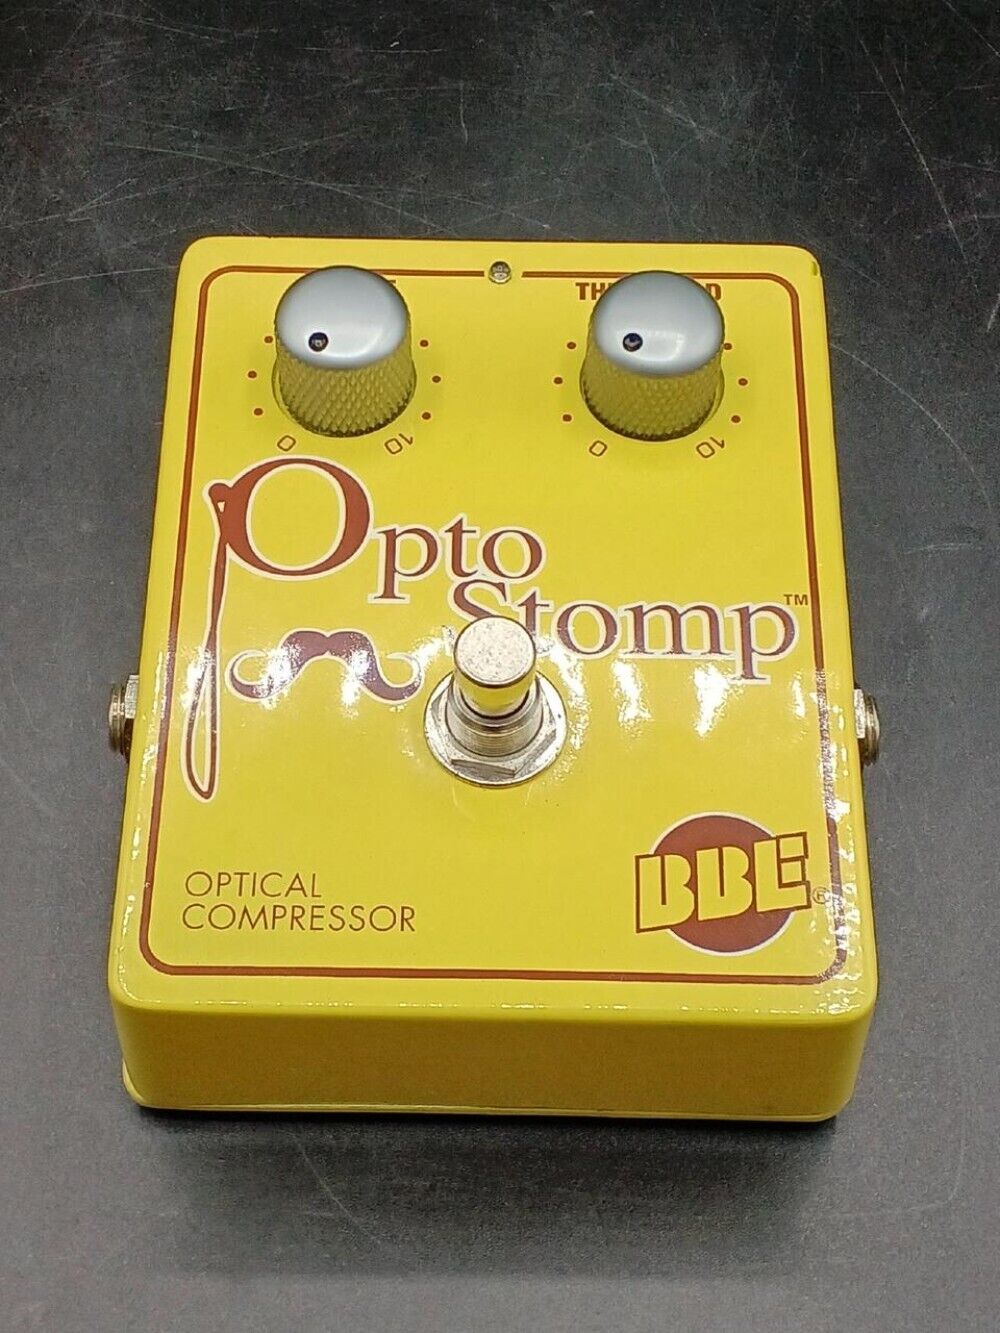 BBE Opto Stomp Optical Compressor Guitar Effect Pedal w/box from